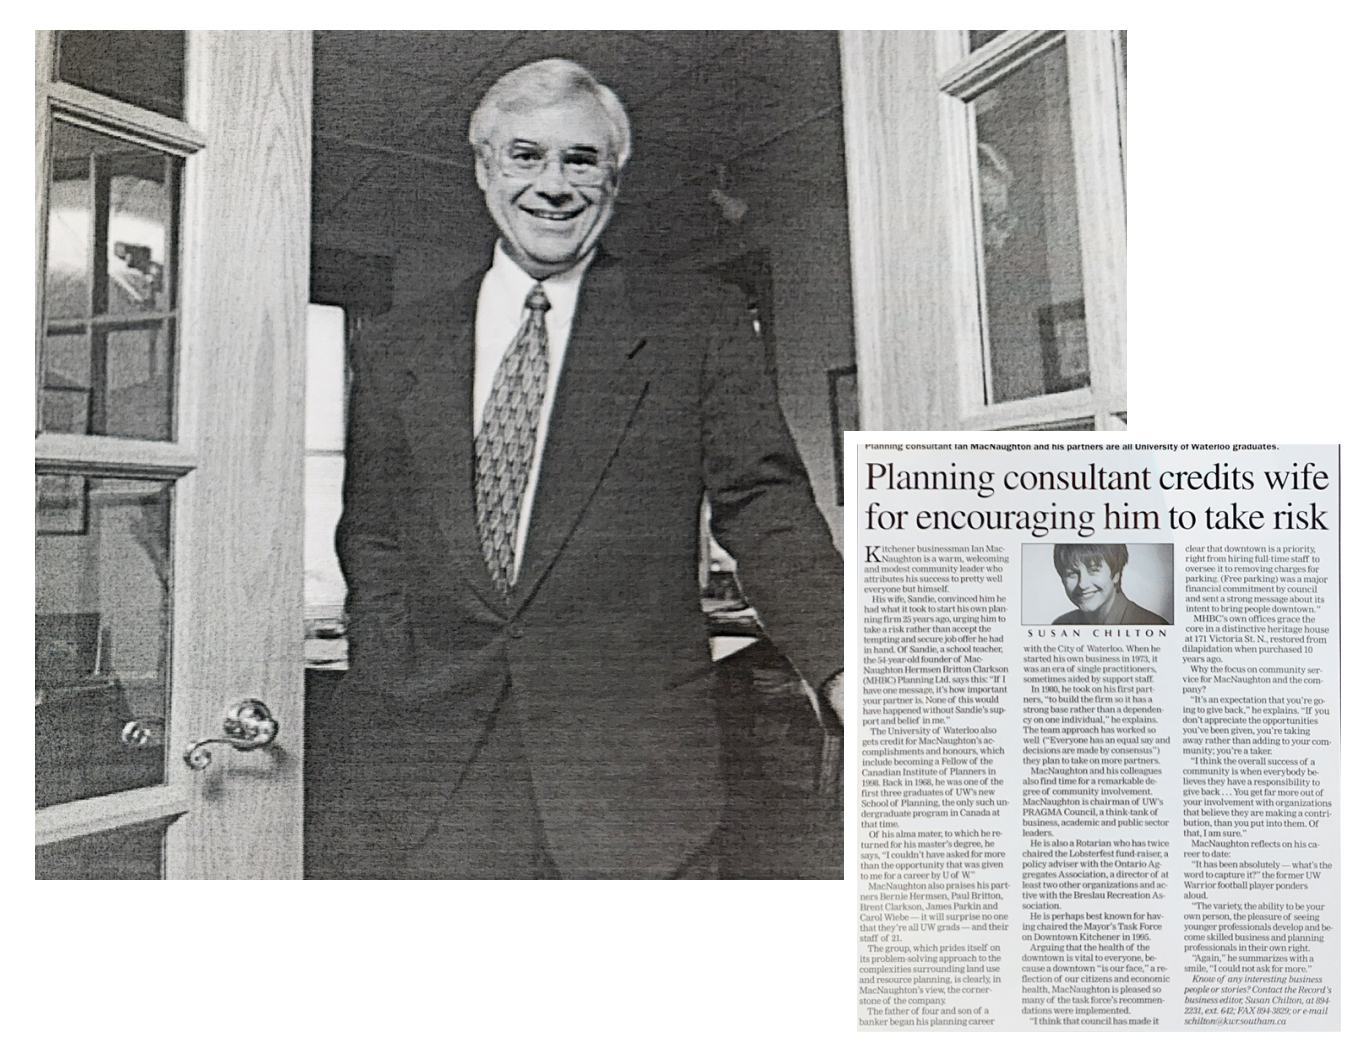 Photo of Ian MacNaughton and newspaper article cutout titled &quot;Planning consultant credits wife for encouraging him to take risk&quot;